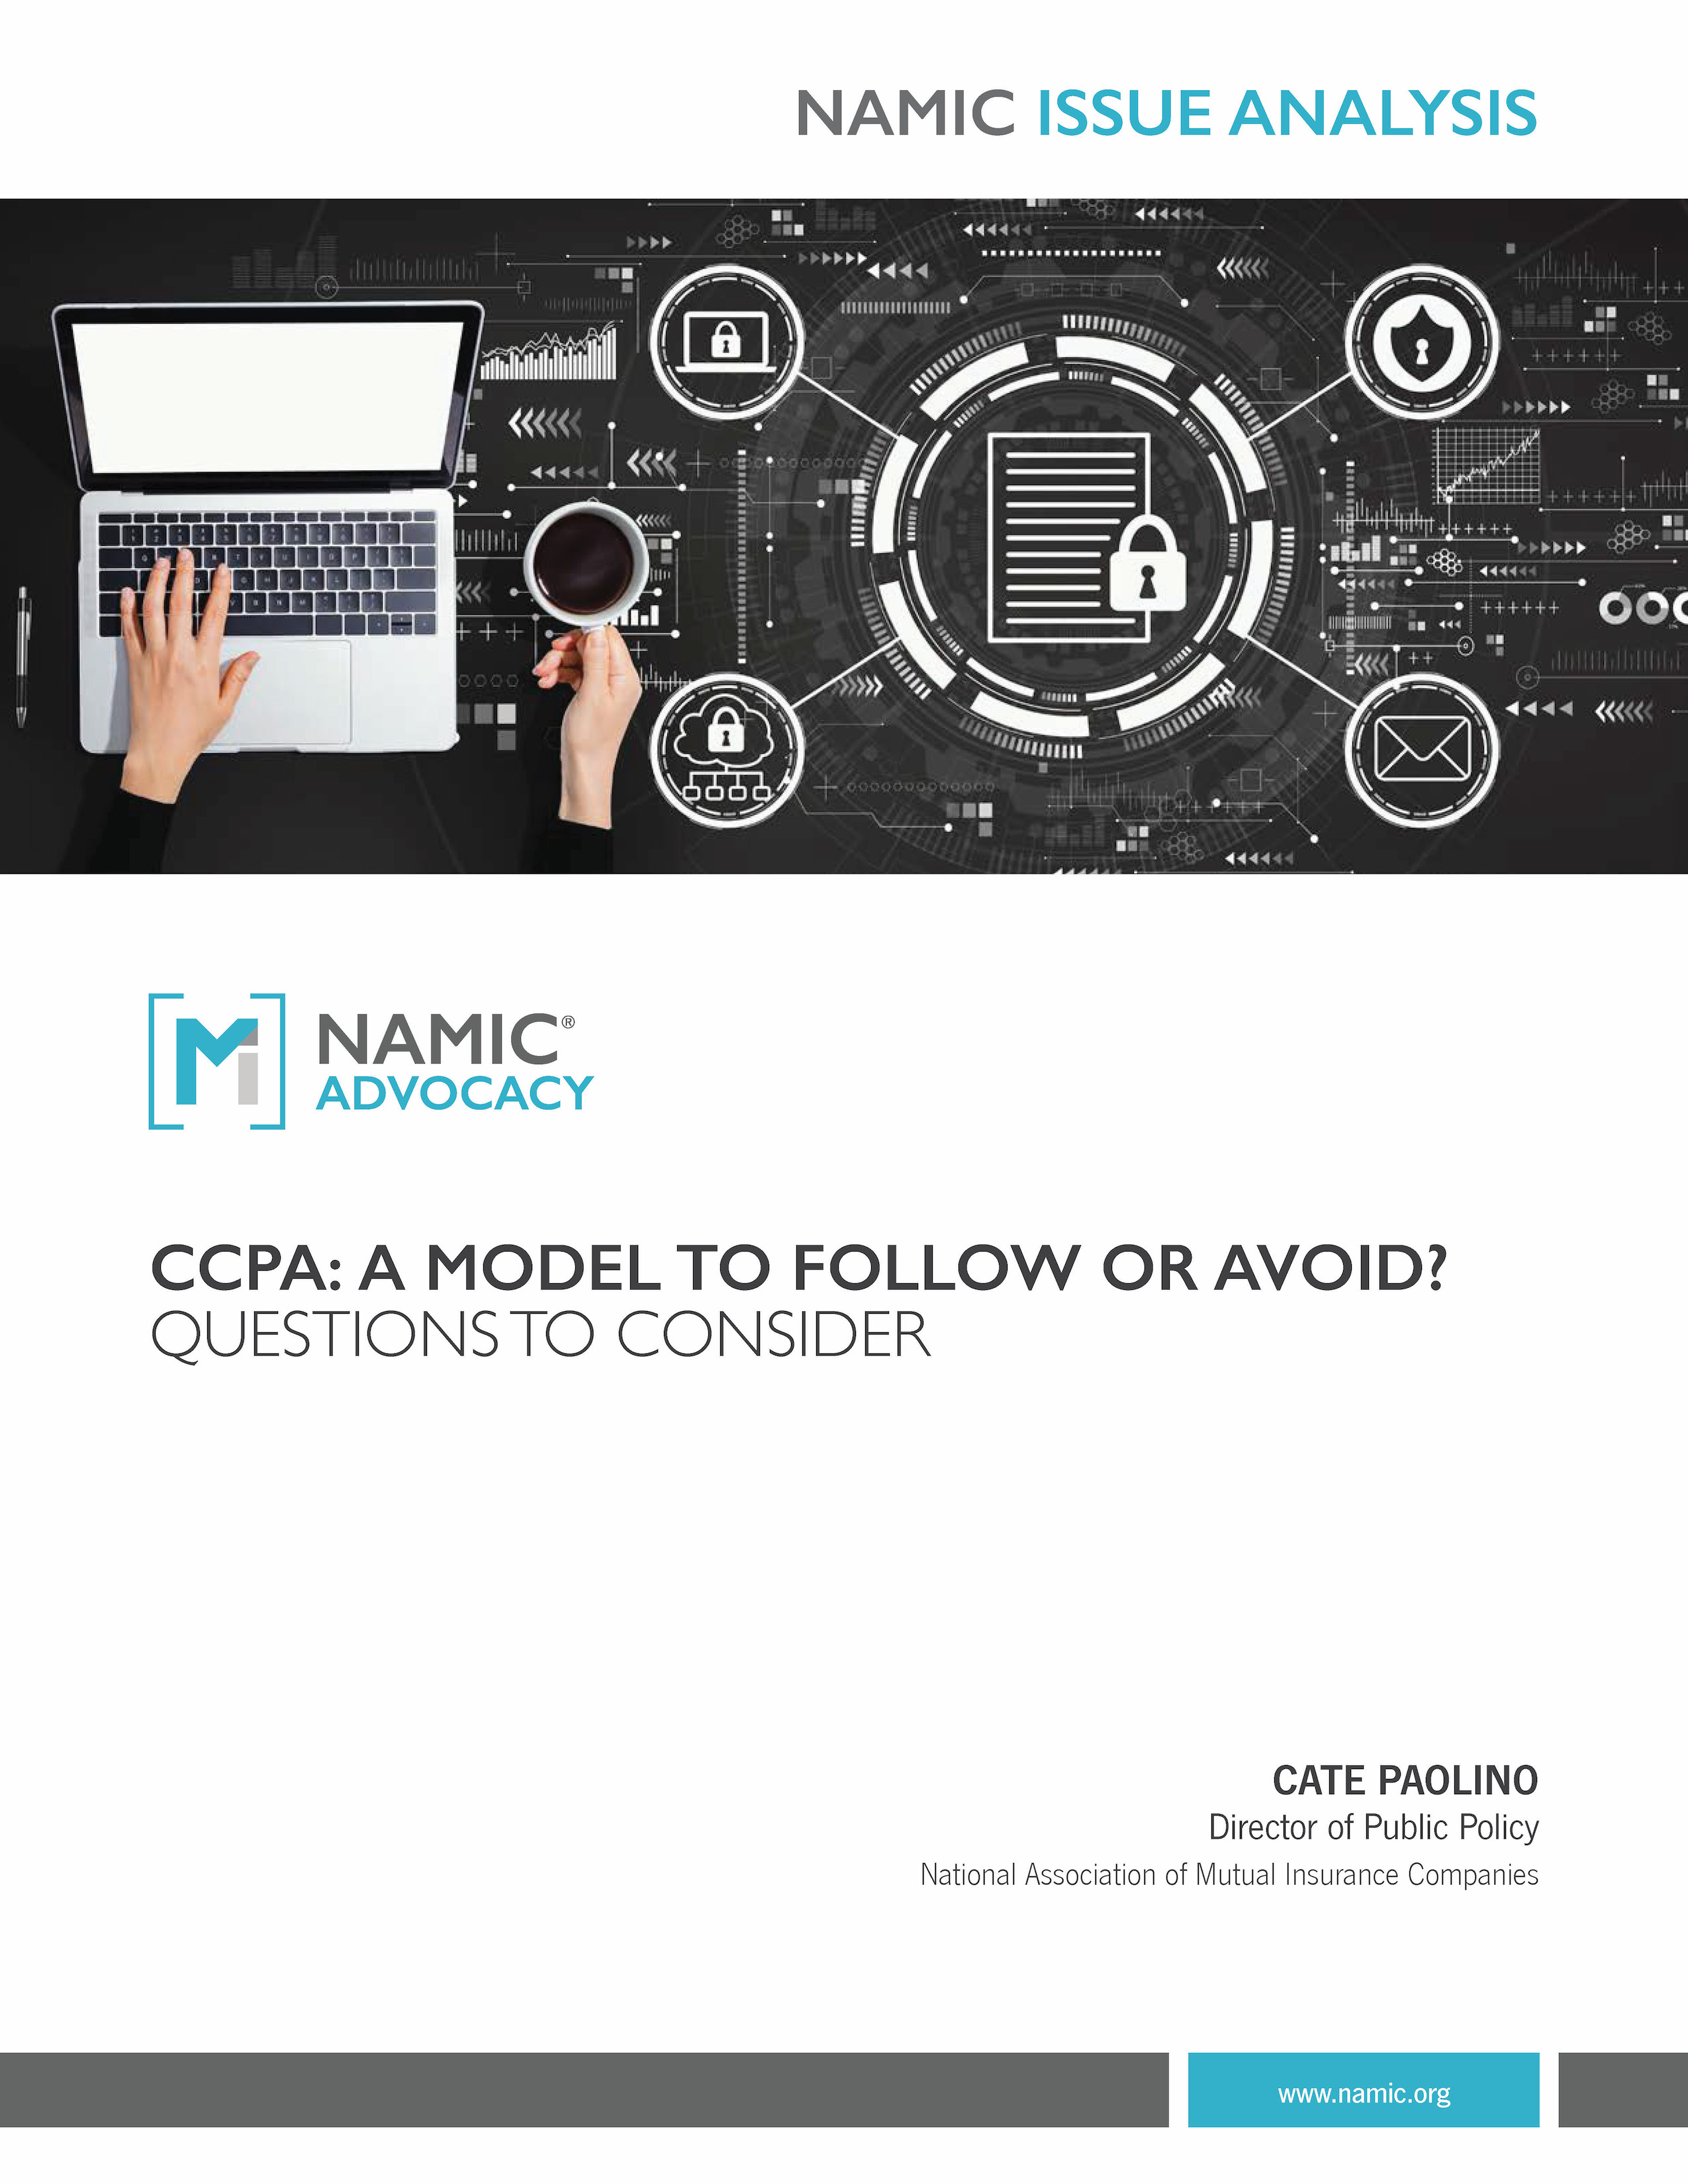 CCPA: A Model to Follow or Avoid? Questions to Consider PDF